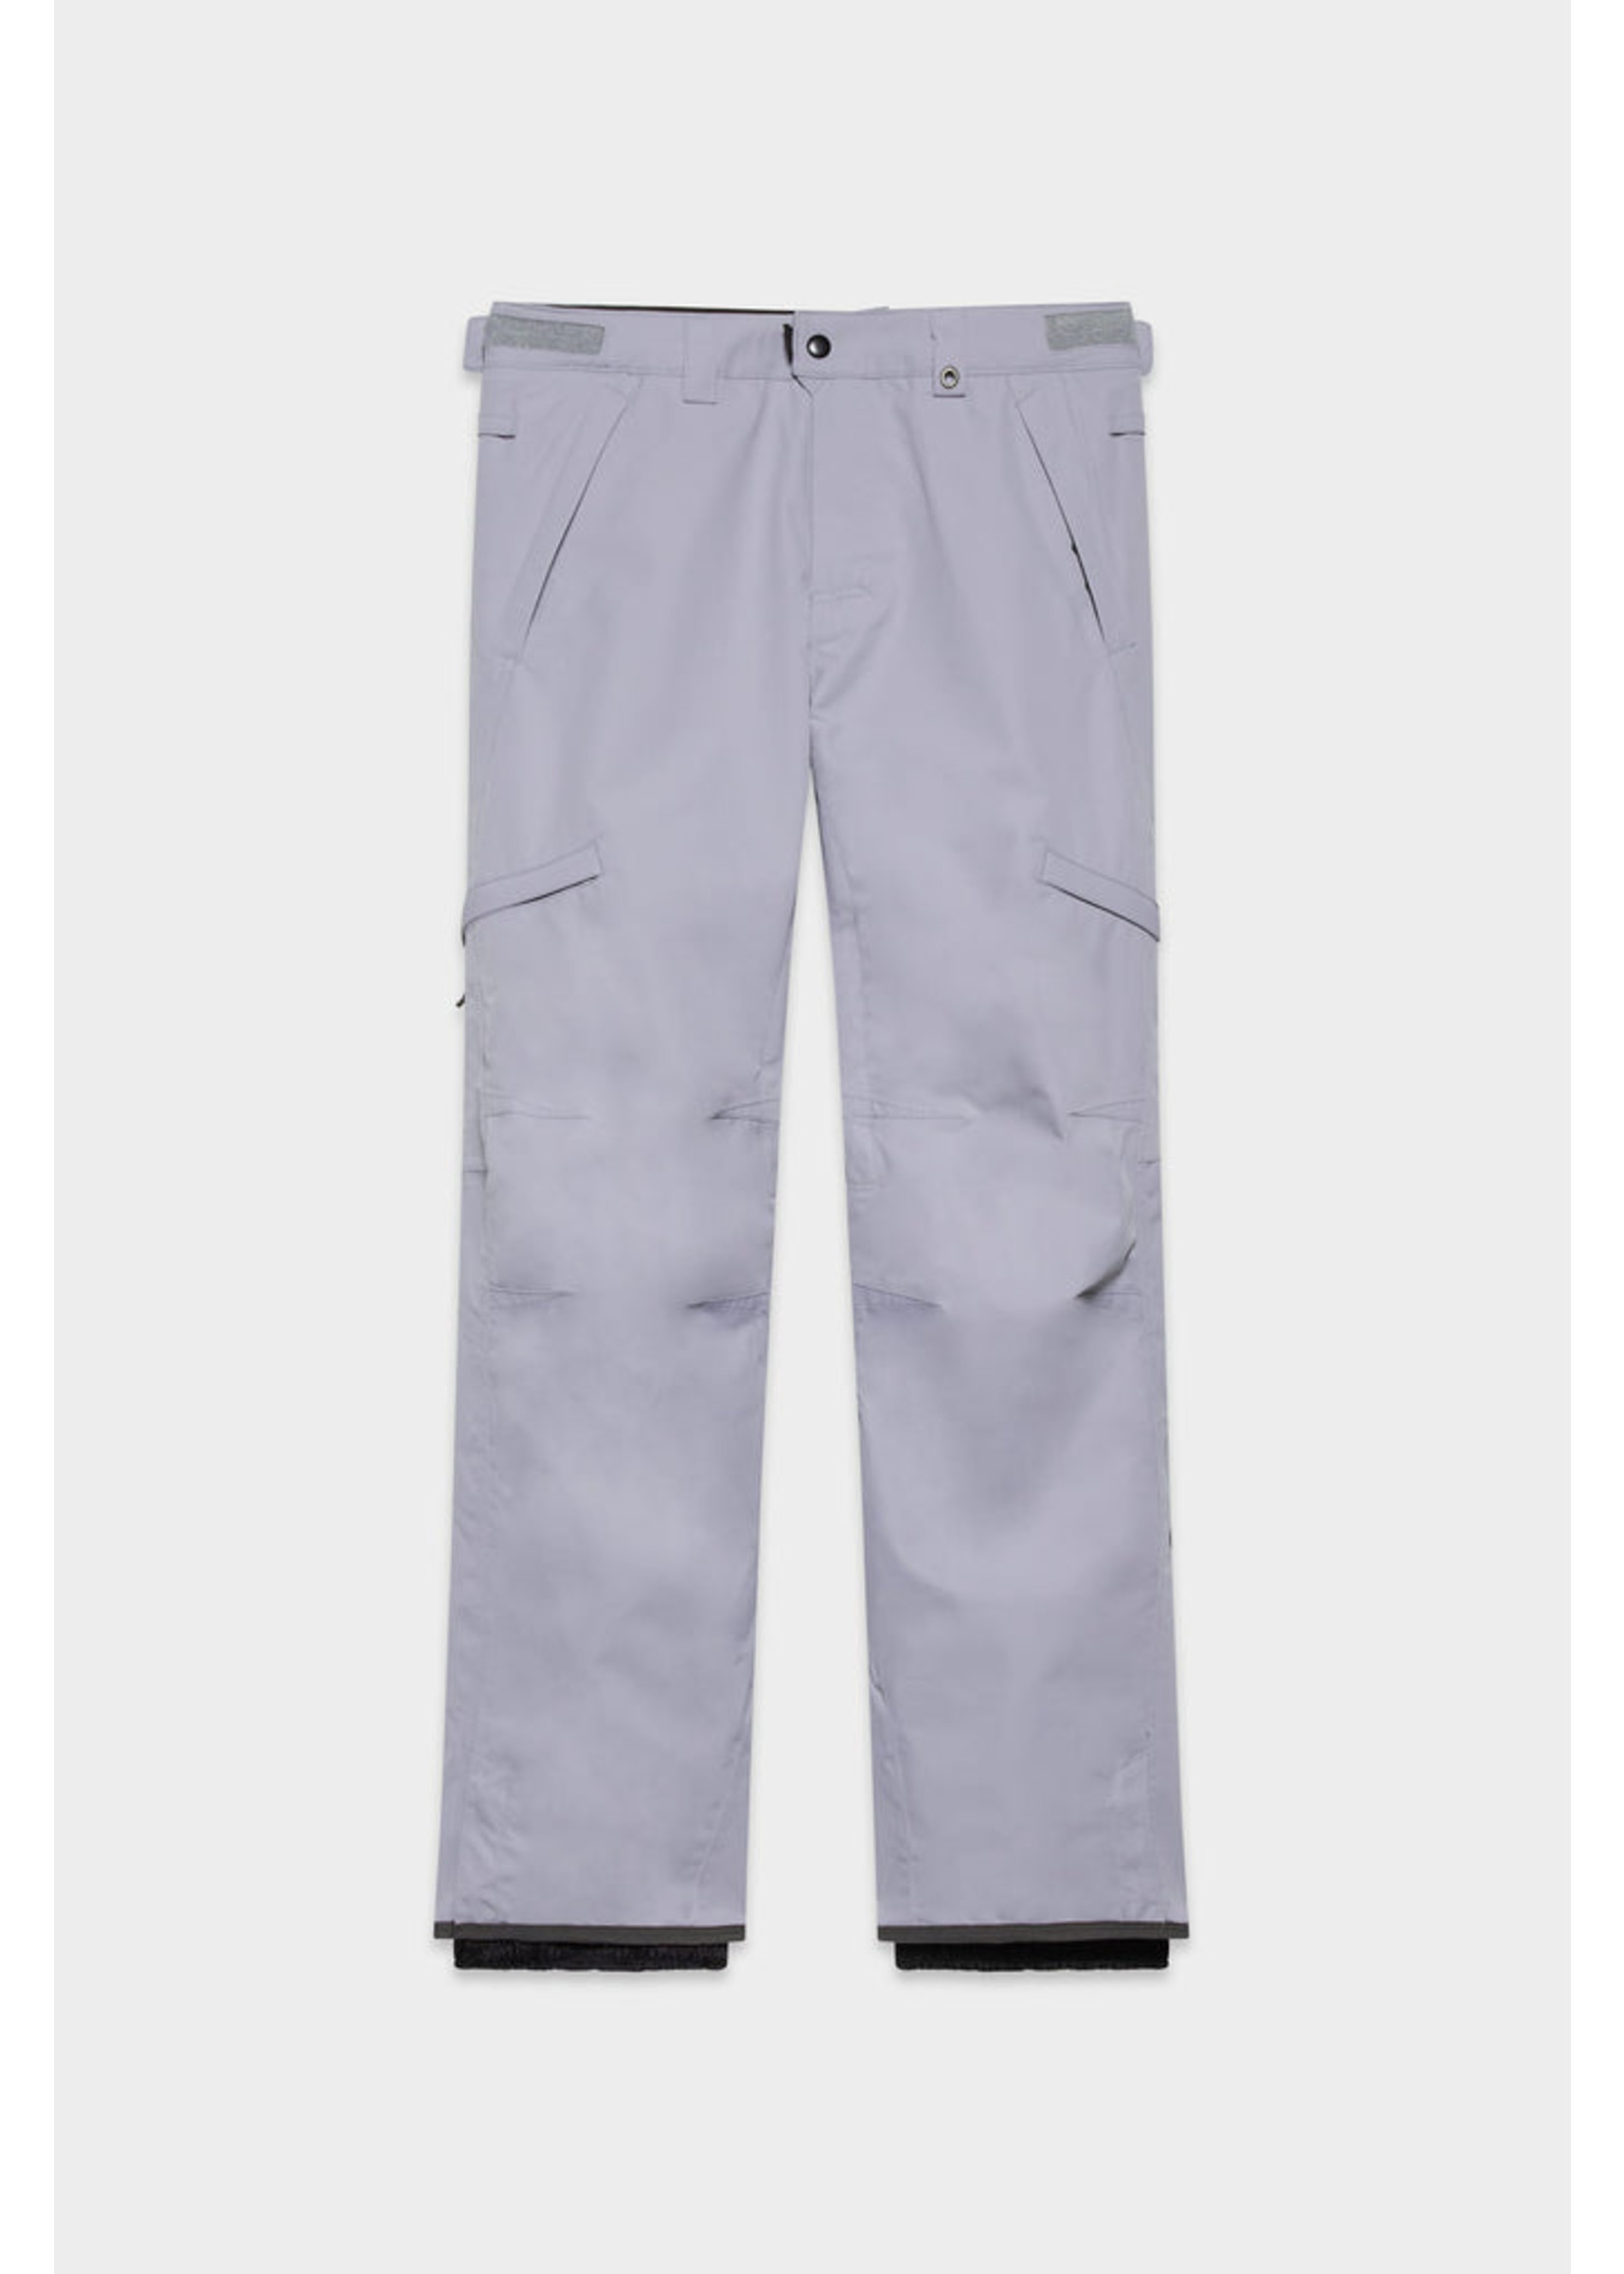 686 WMNS SMARTY 3-IN-1 CARGO PANT W22